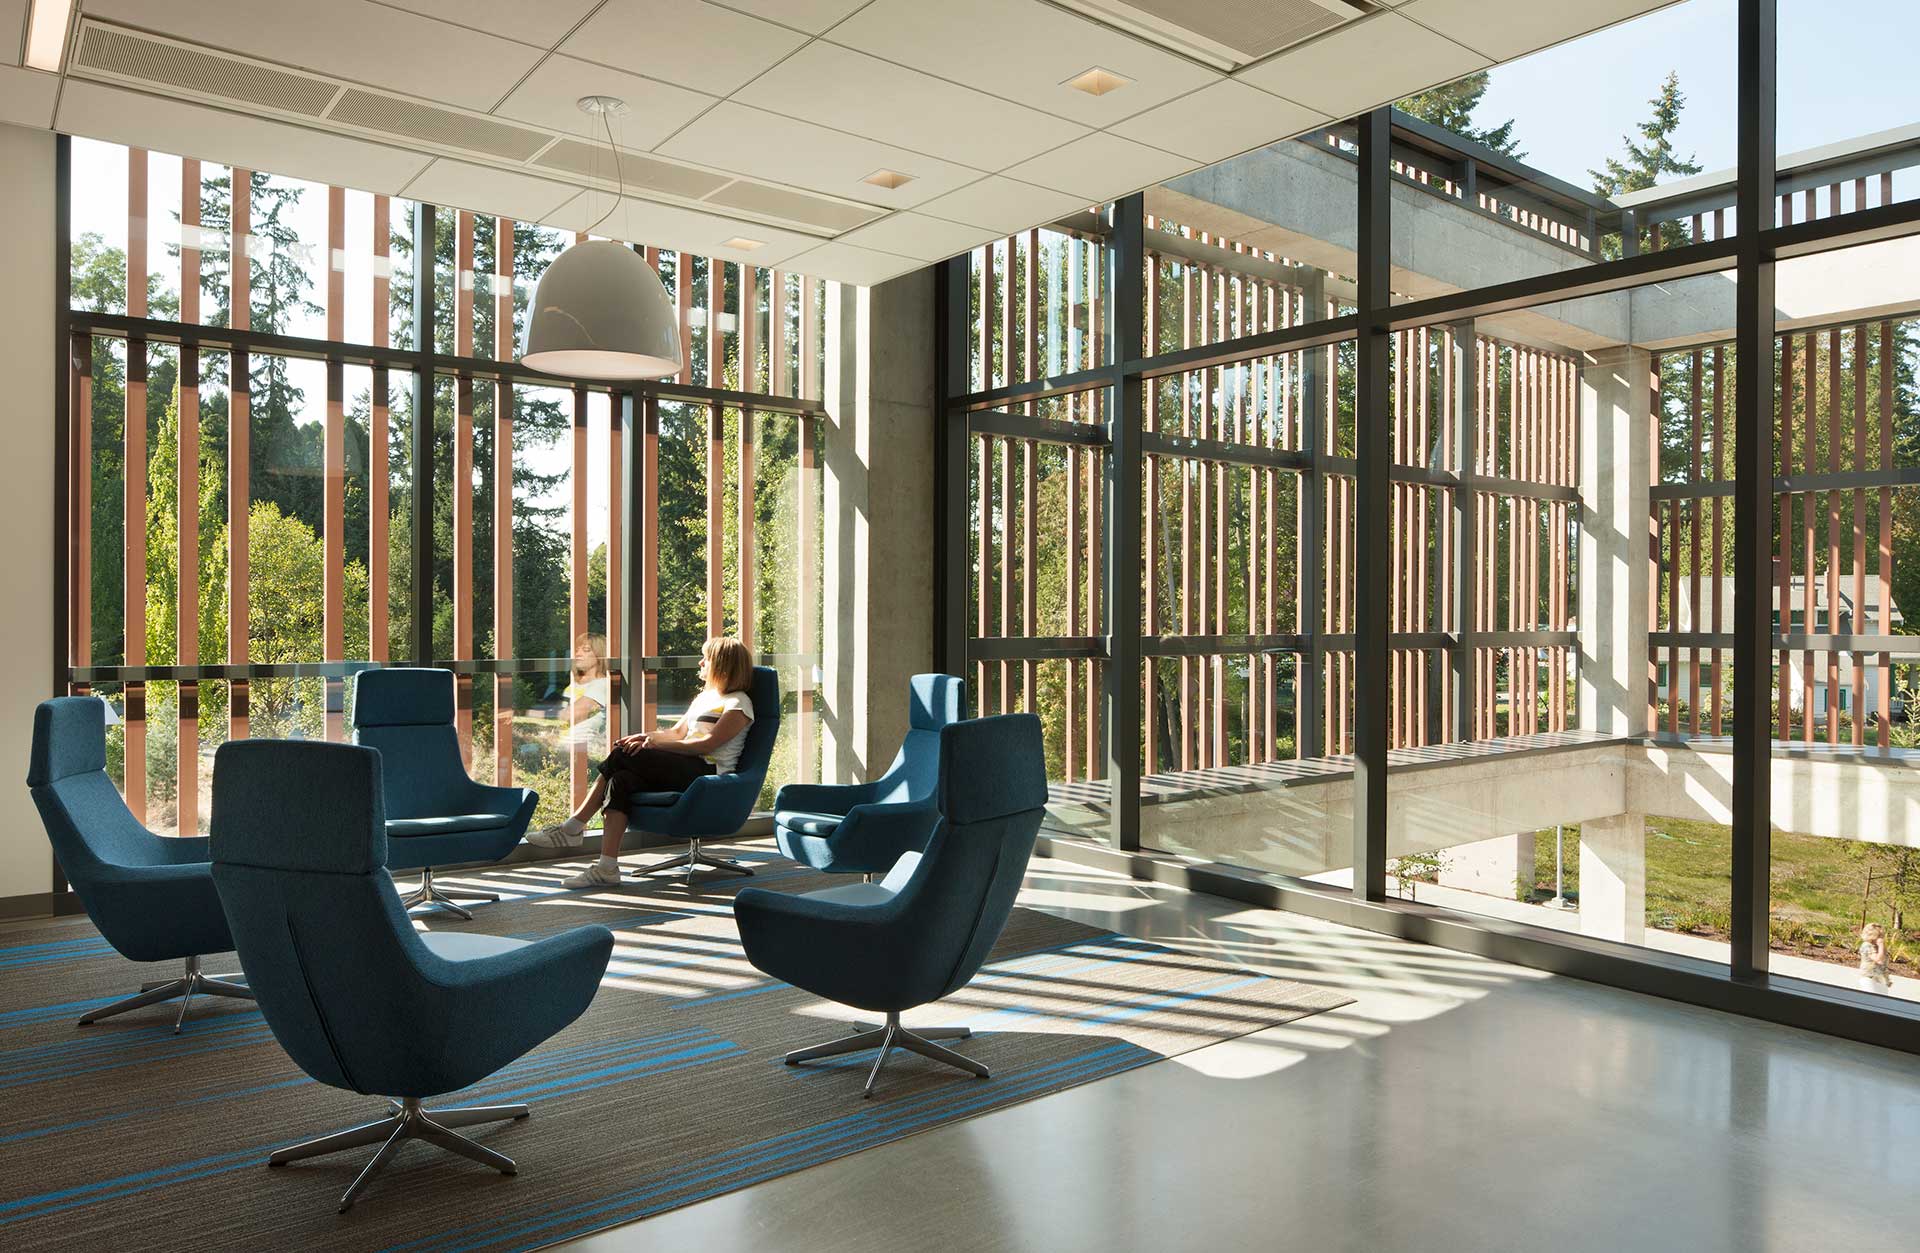 Dicovery Hall sitting area